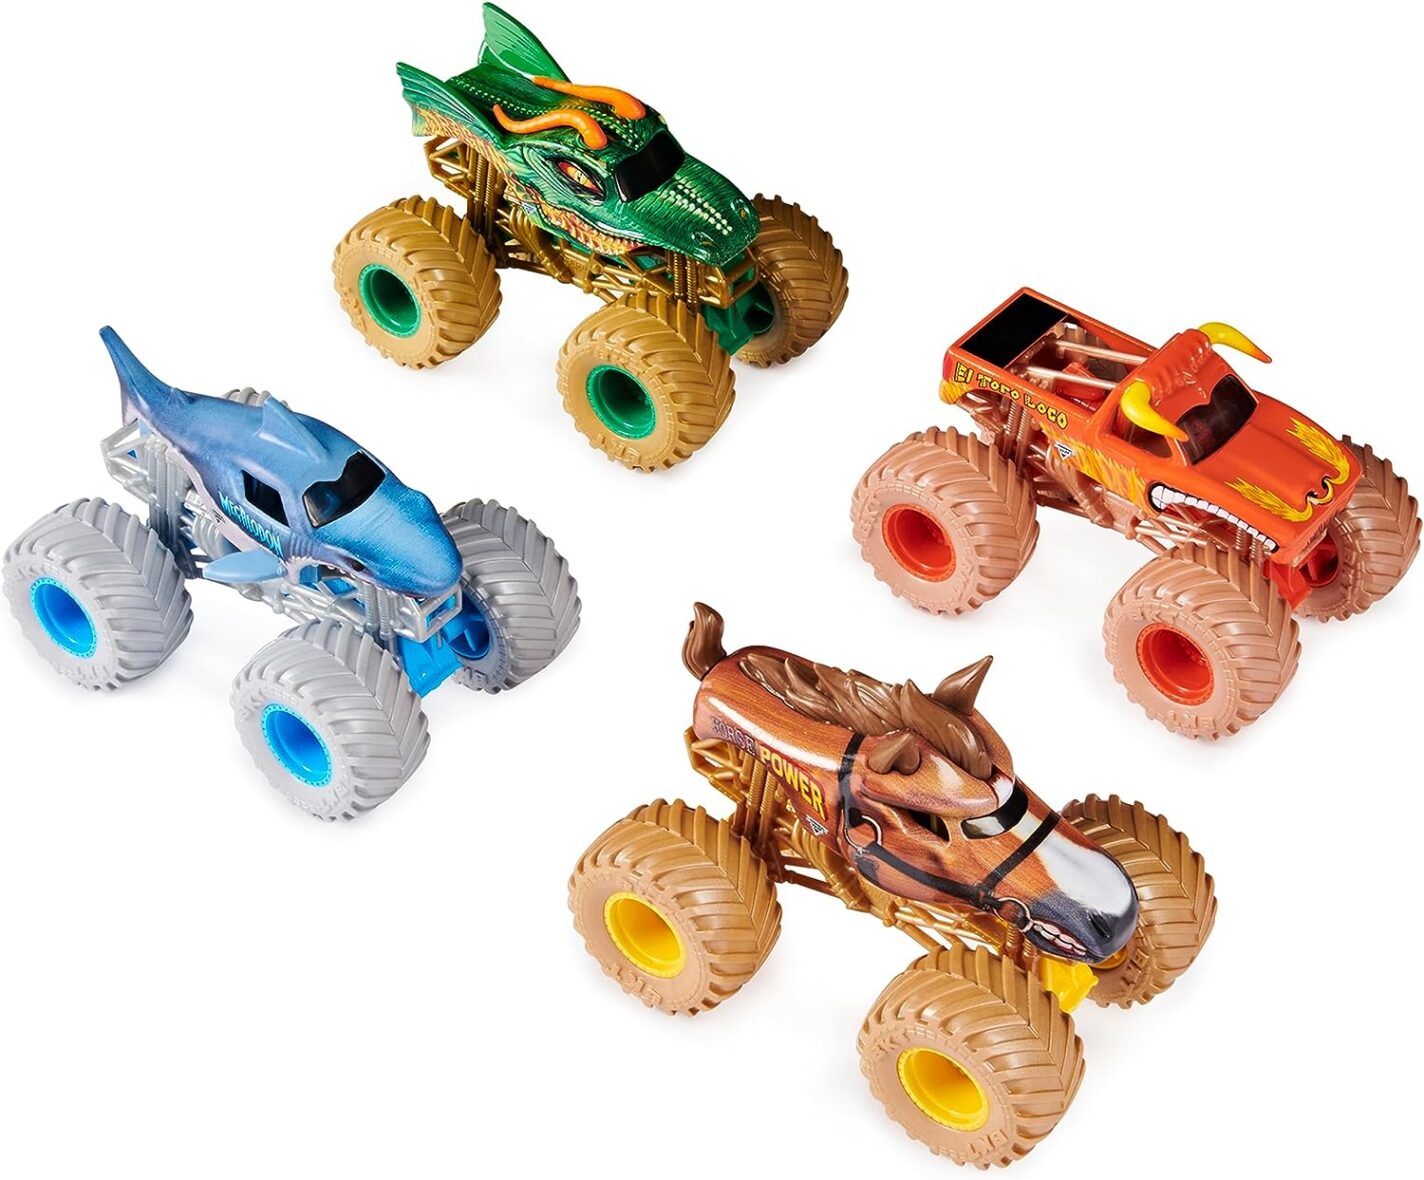 Monster Jam, Power Beasts 4-Pack Monster Trucks (El Toro Loco, Megalodon, Dragon and Horse Power), 1:64 Scale, Kids Toys for Boy & Girls Ages 3 and up